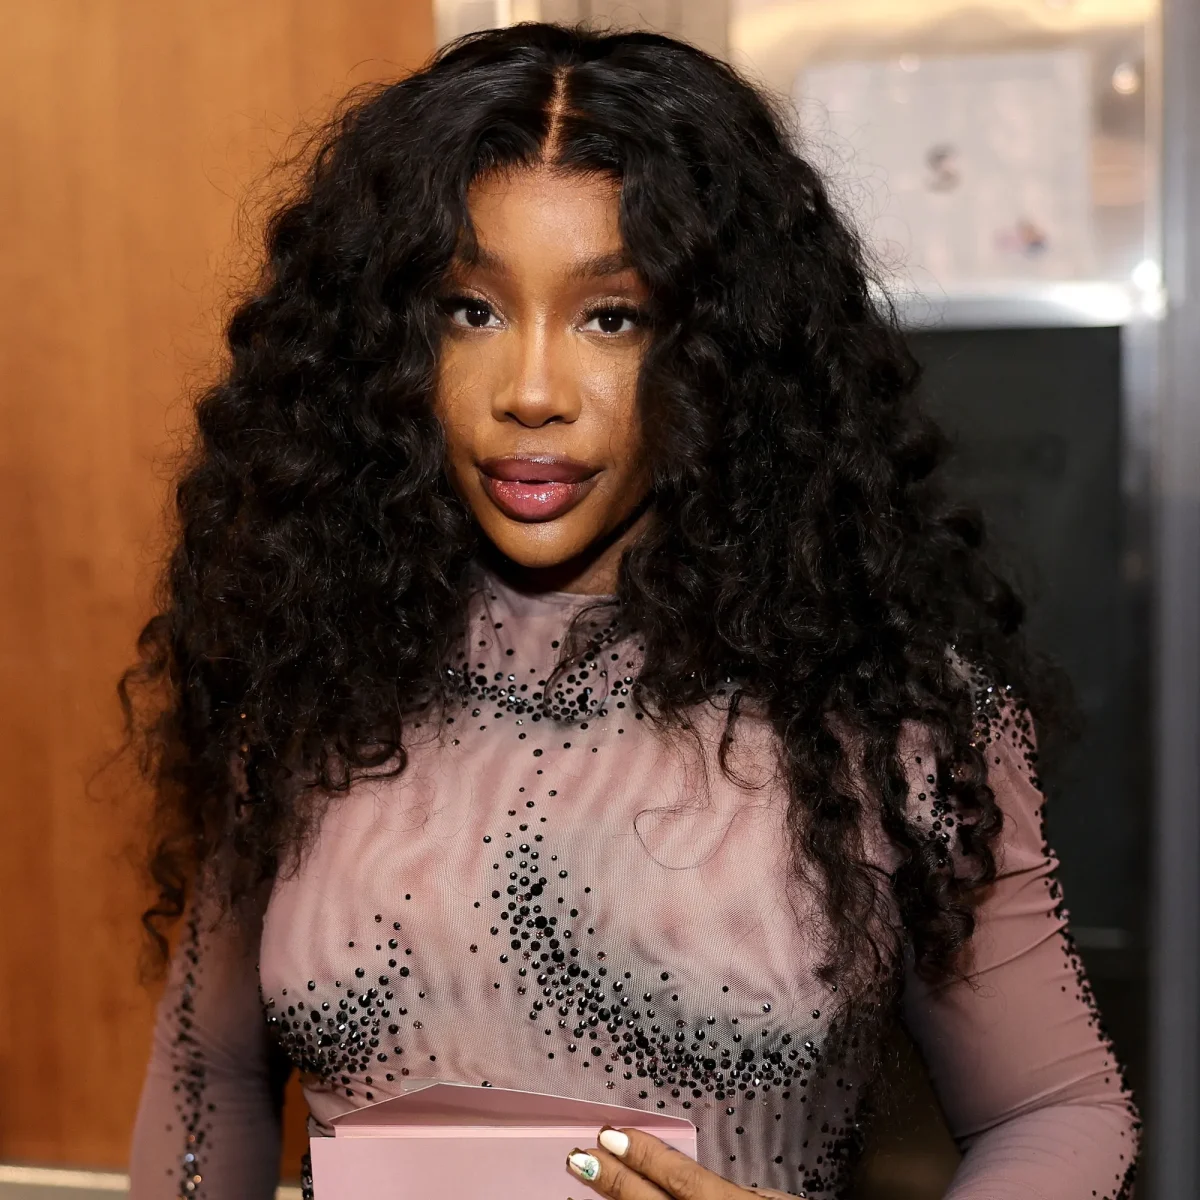 Sza Reacts To Fans' Unruly Behavior At Her Aussie Concert 10